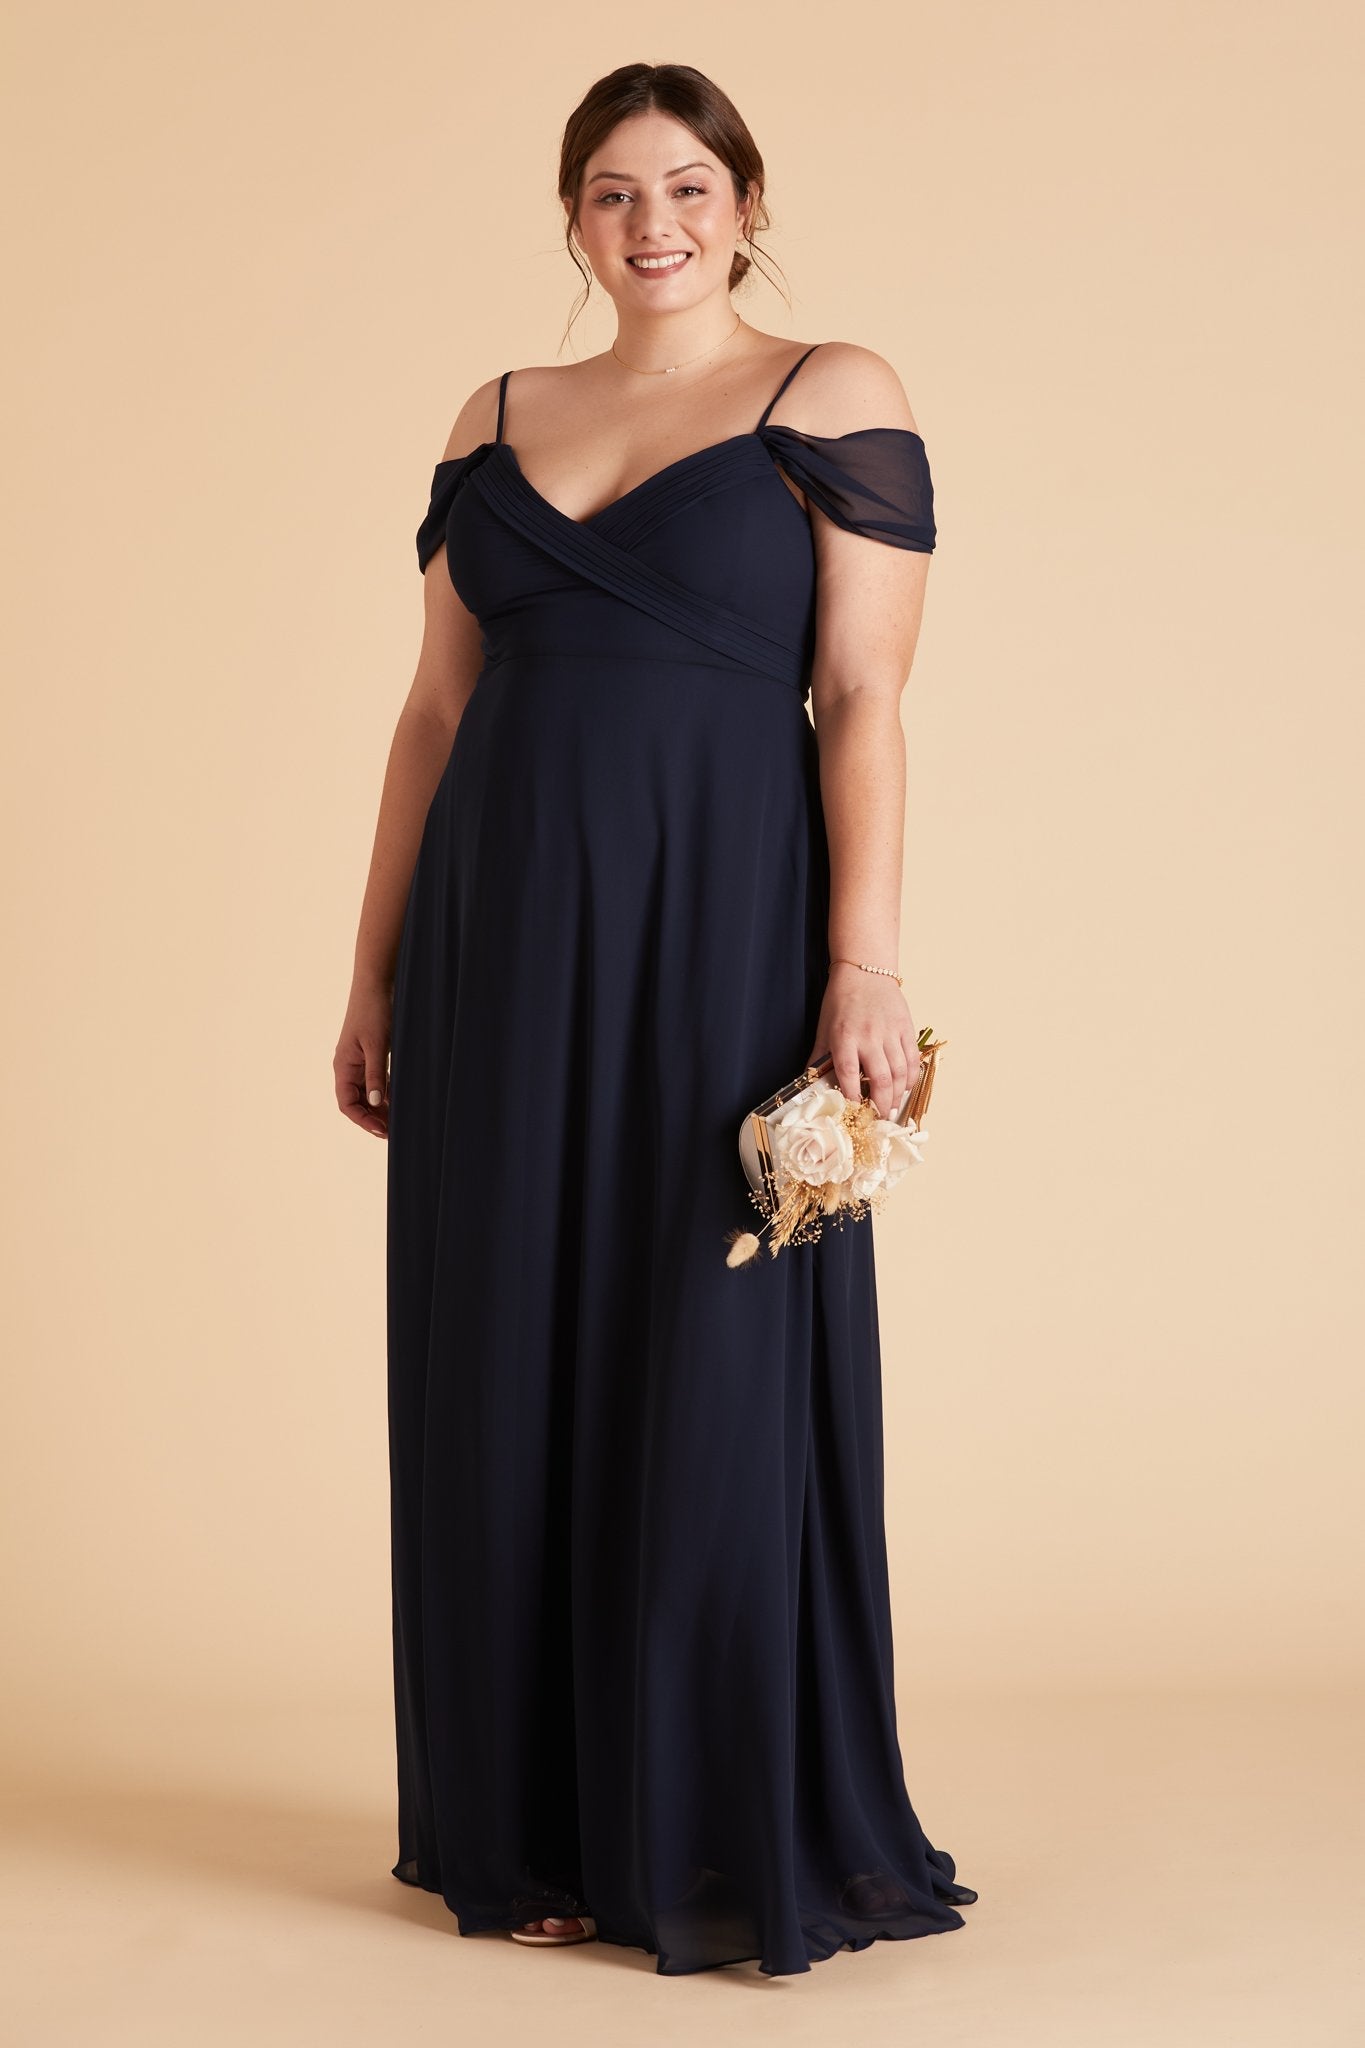 Spence convertible plus size bridesmaid dress in navy blue chiffon by Birdy Grey, front view